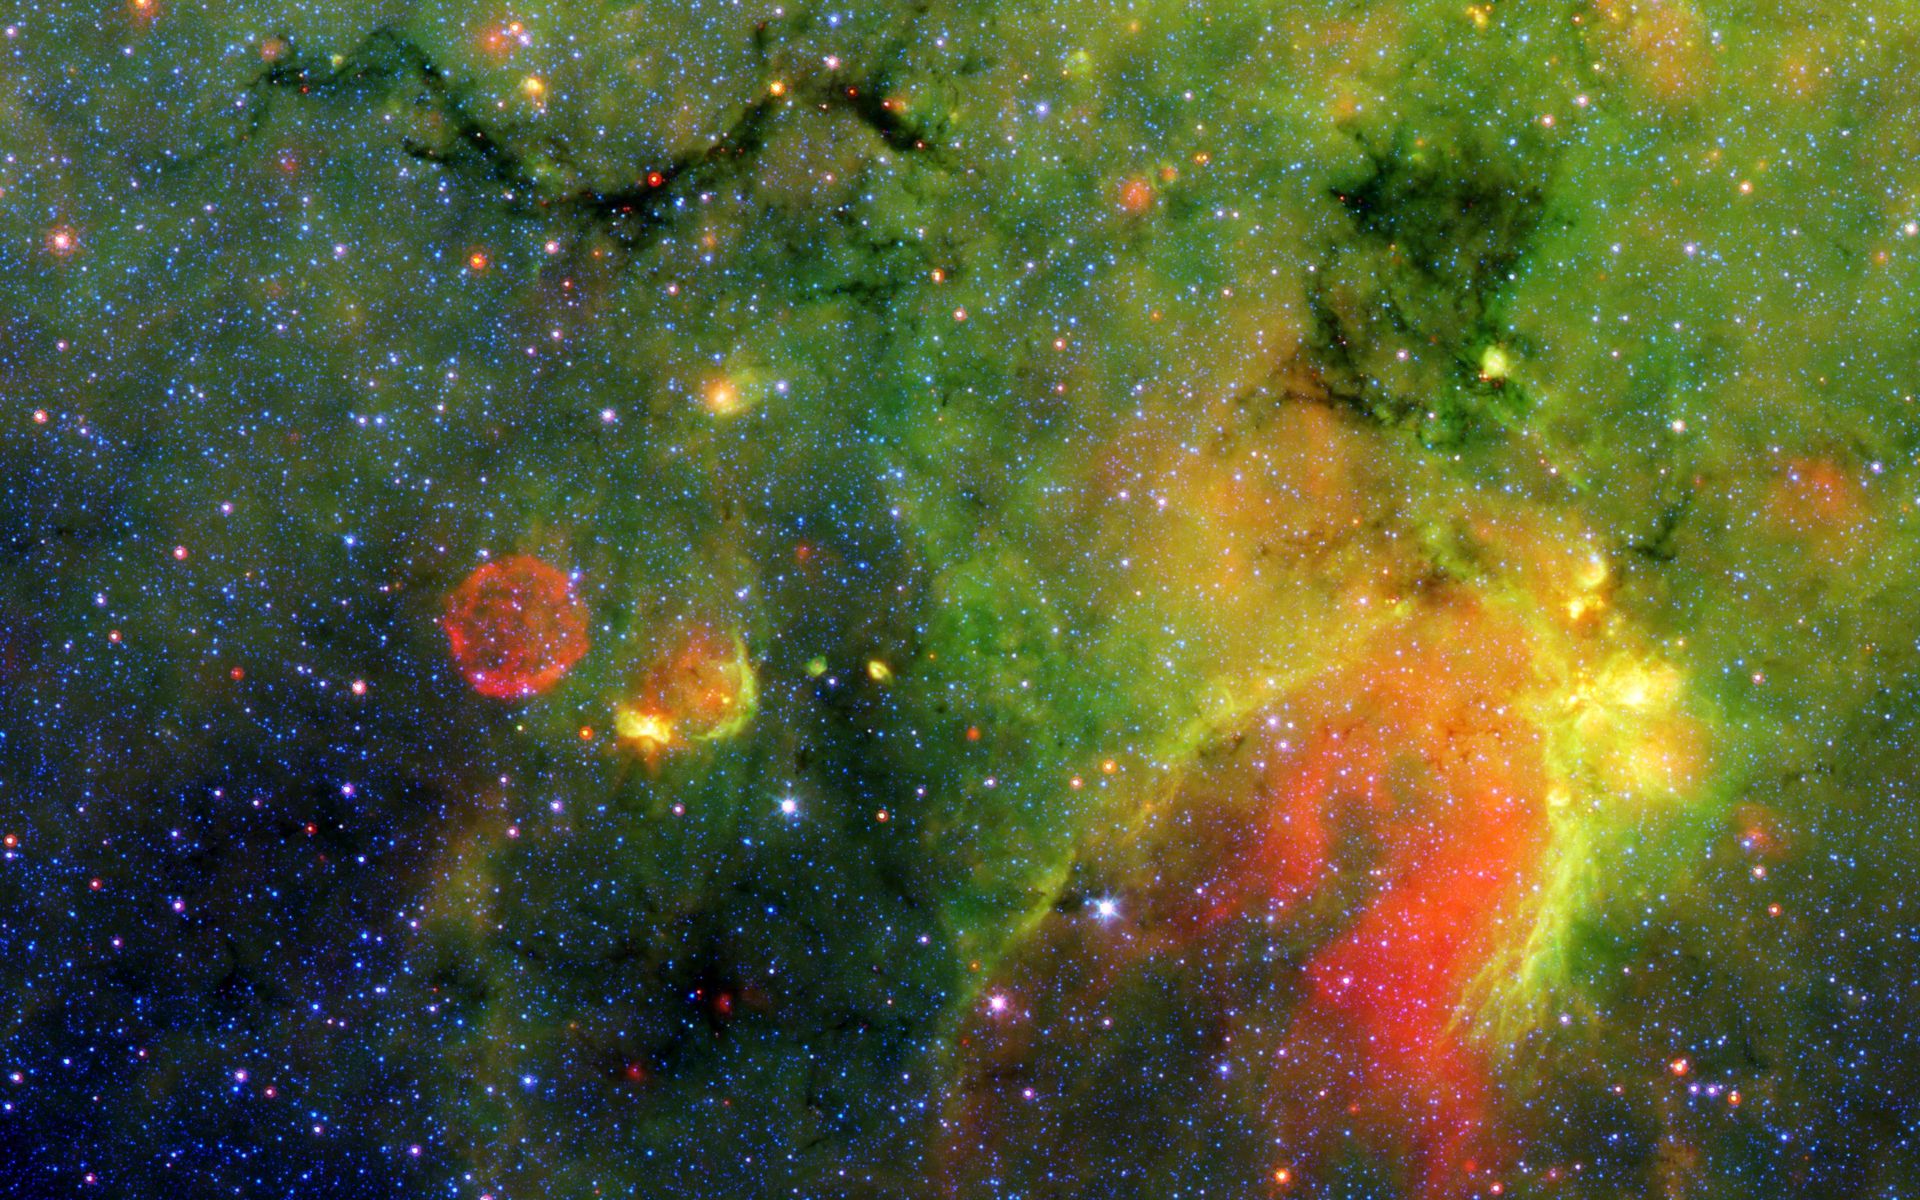 Space Image Where Galactic Snakes Live